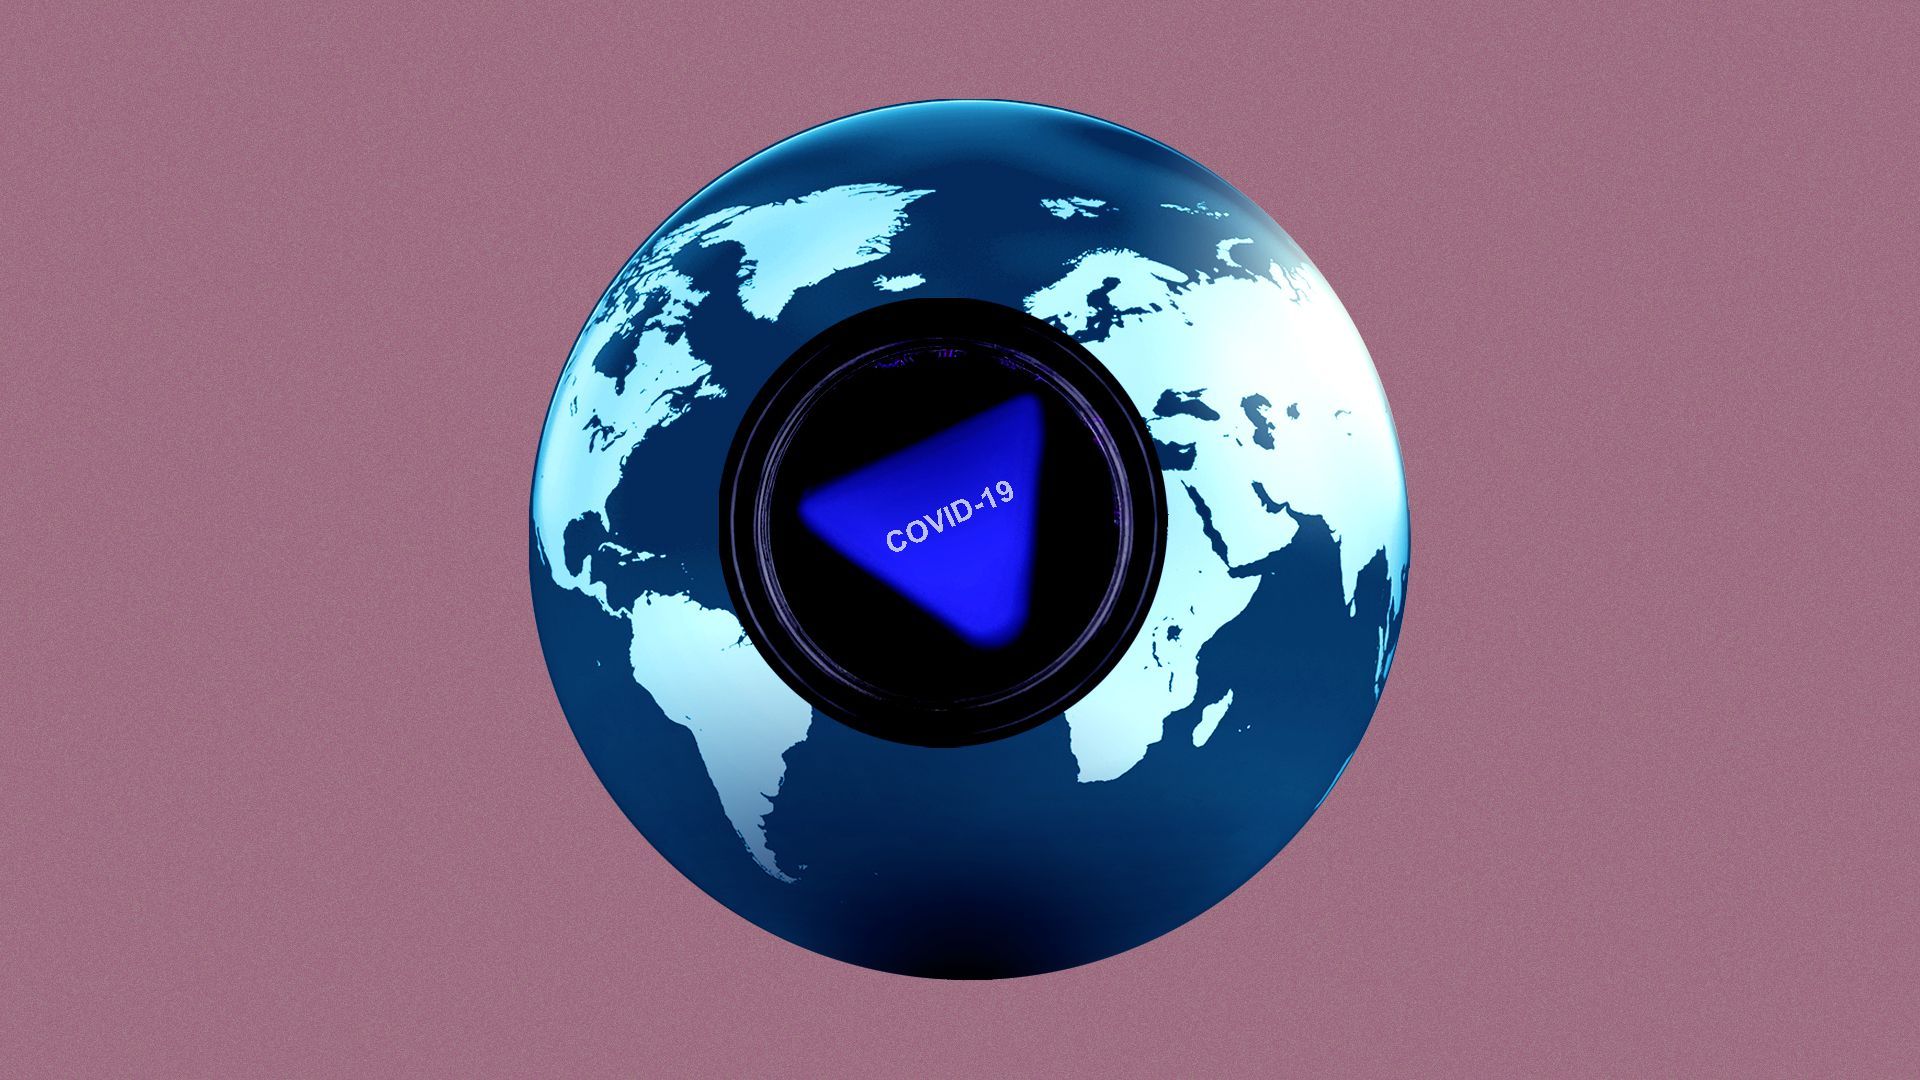 Illustration of an earth as a Magic 8 ball with the triangle in the center reading "Covid-19"